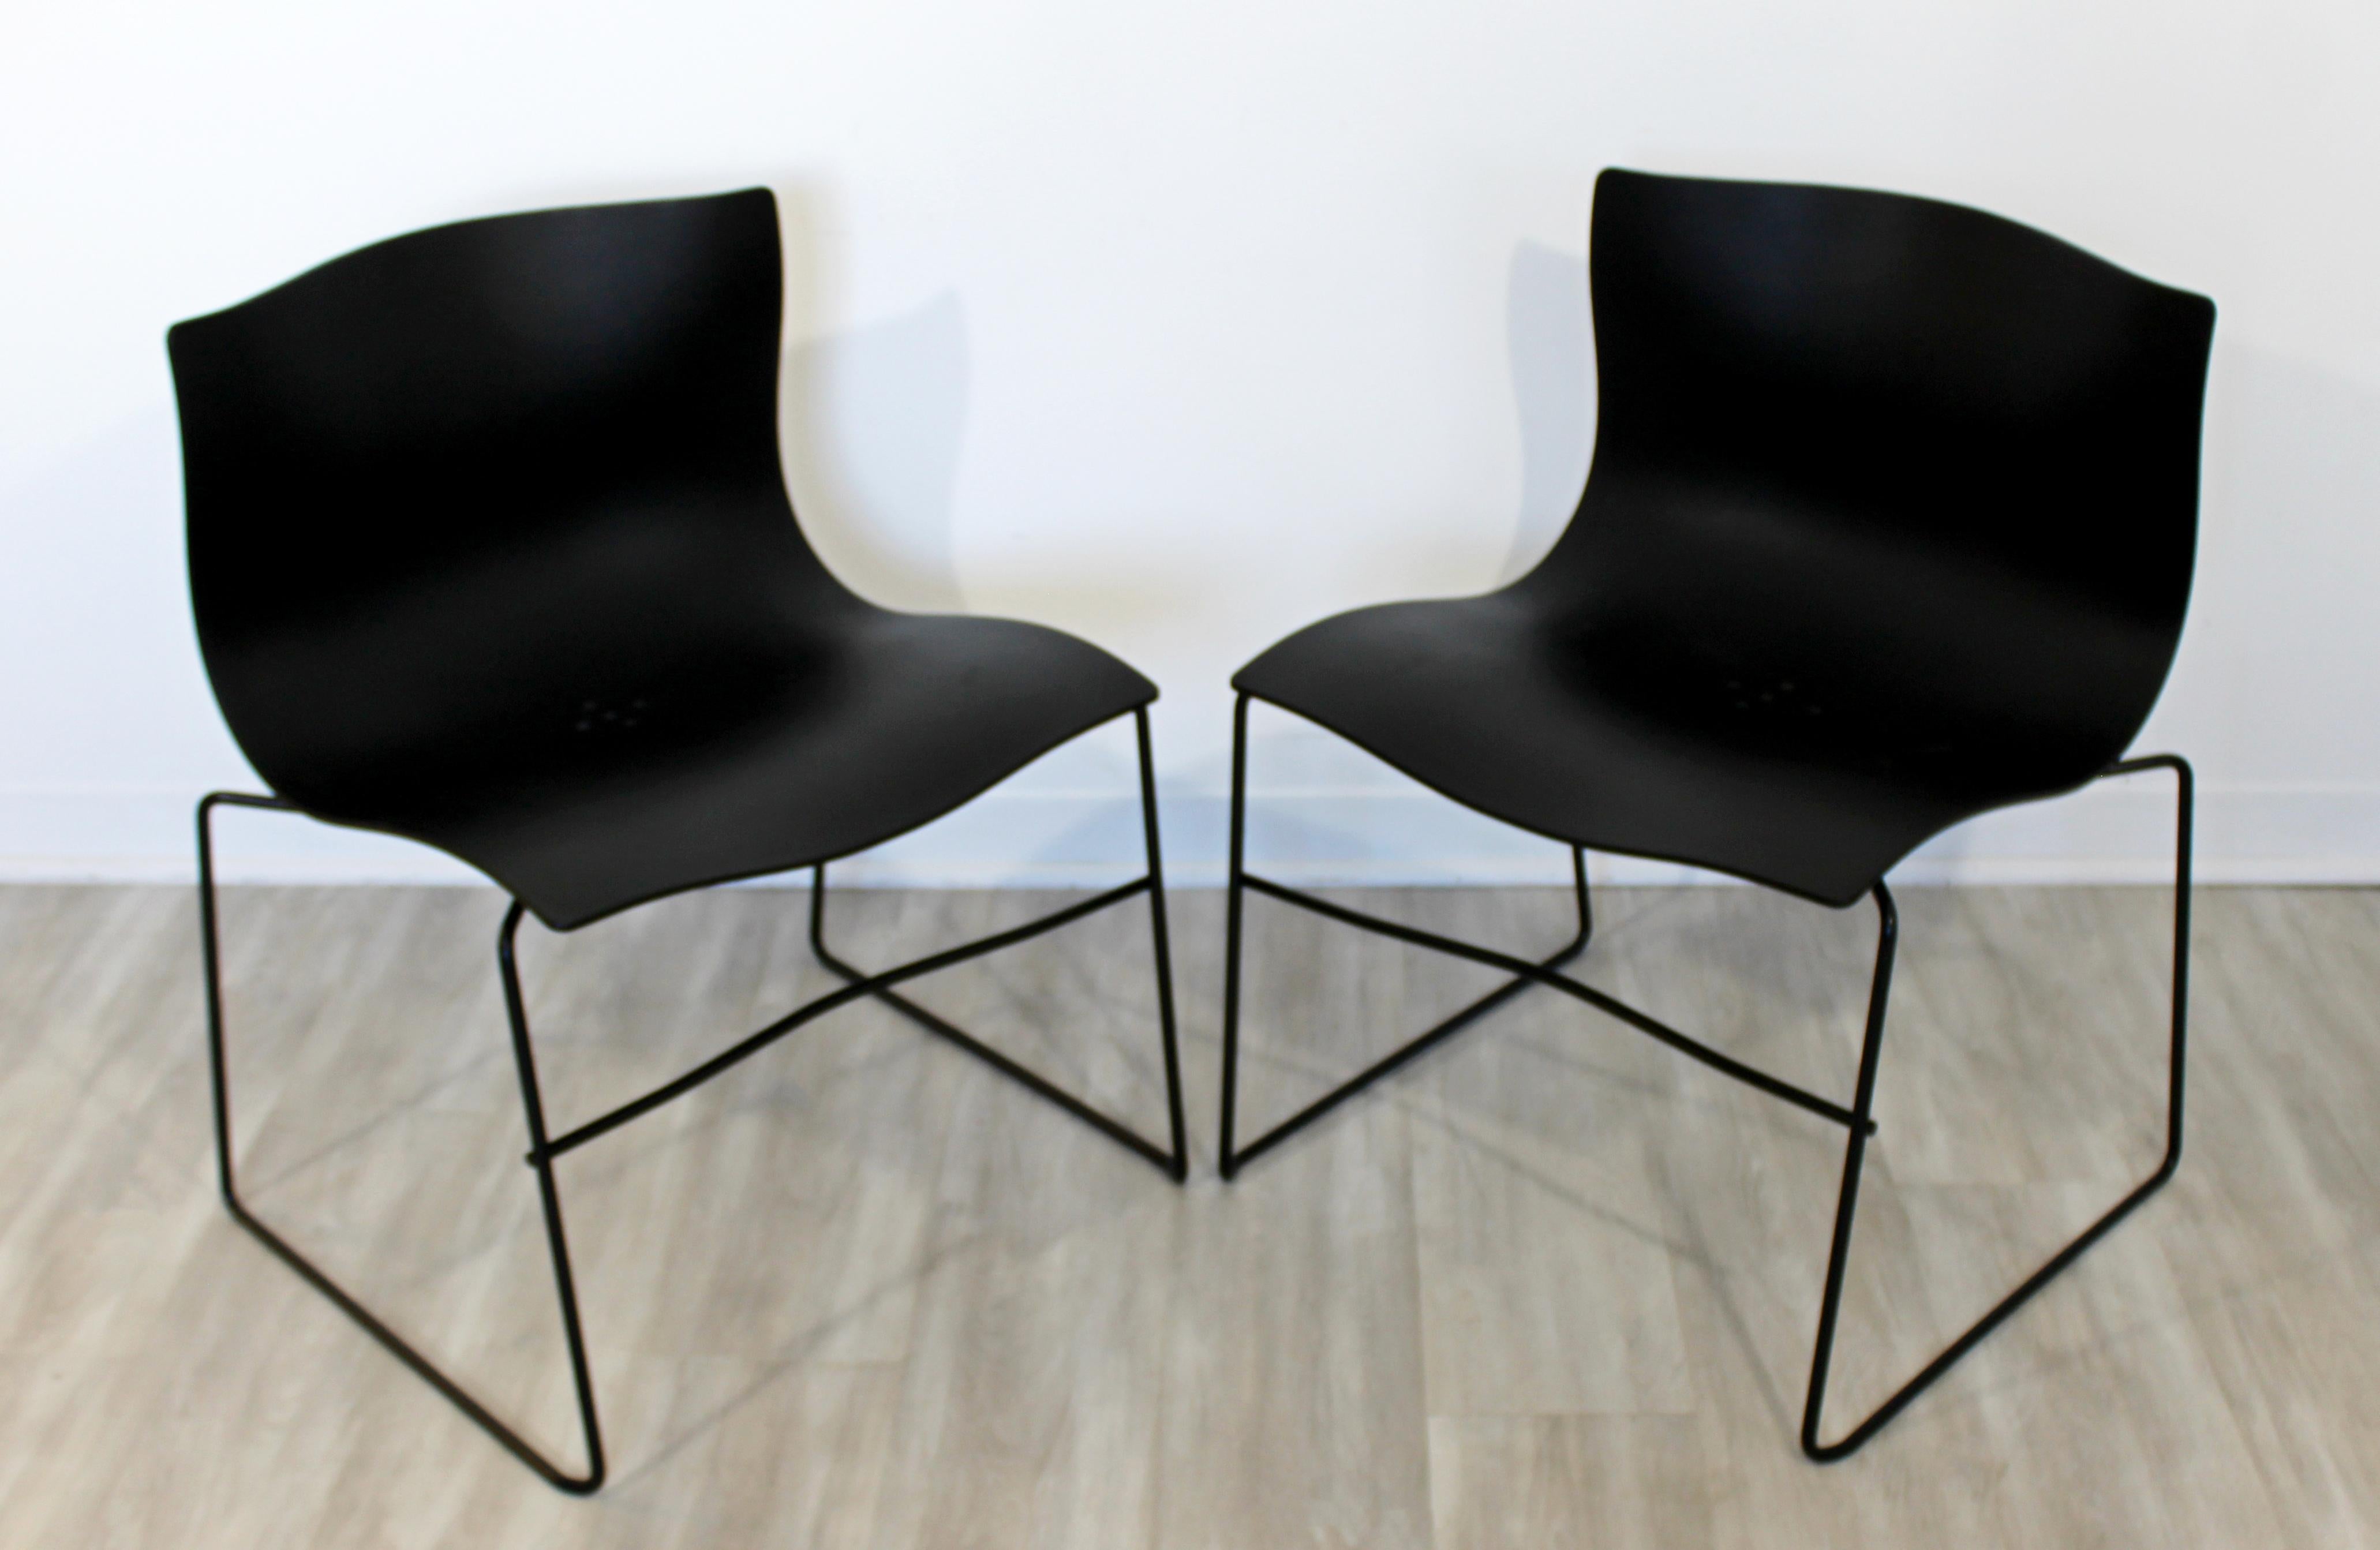 Late 20th Century Contemporary Modern Massimo Vignelli Knoll Set of 4 Handkerchief Side Chairs